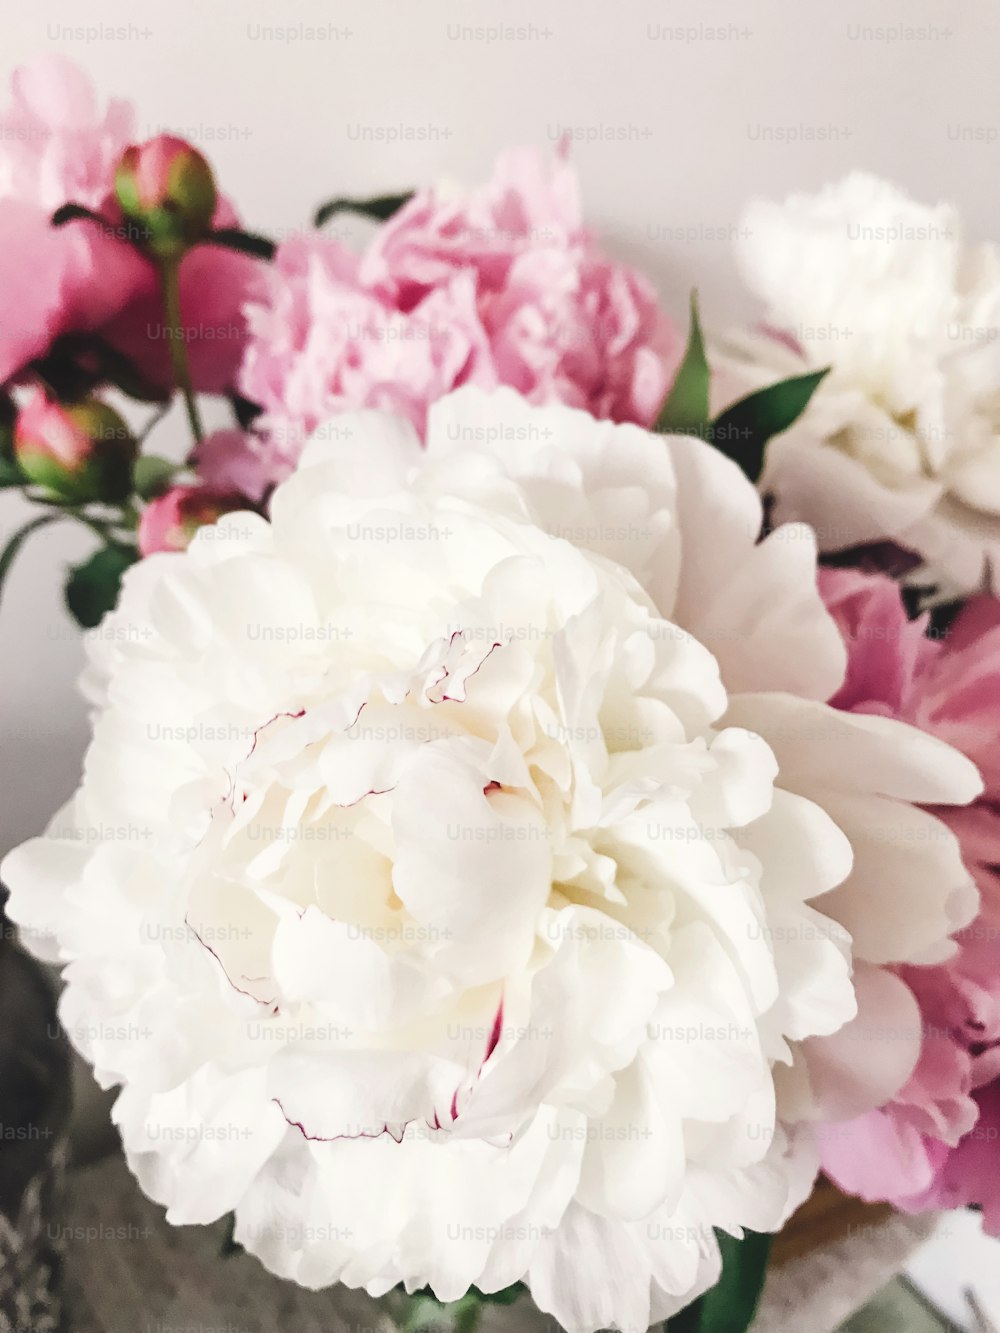 Best Pink Peony Pictures [HD]  Download Free Images on Unsplash